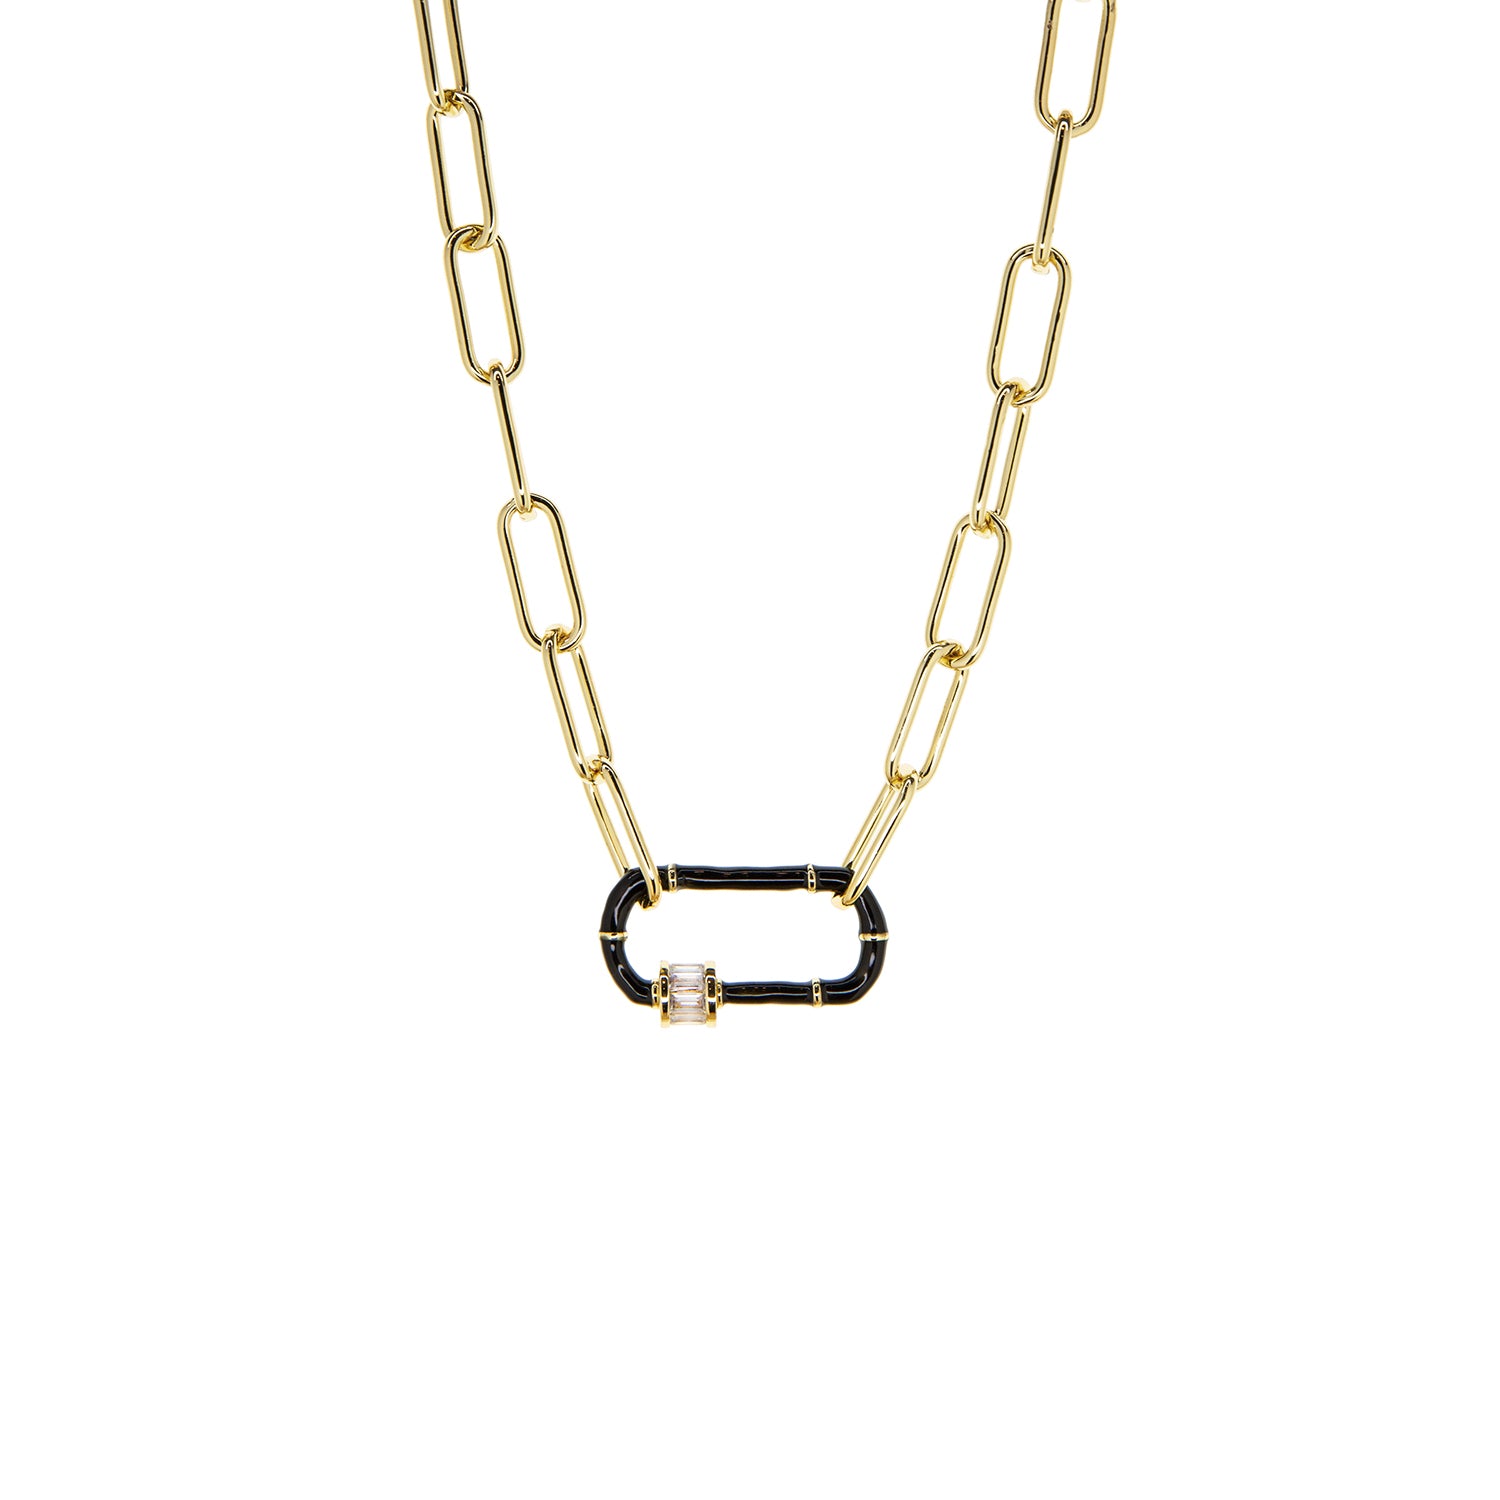 Double Life Carabiner Necklace